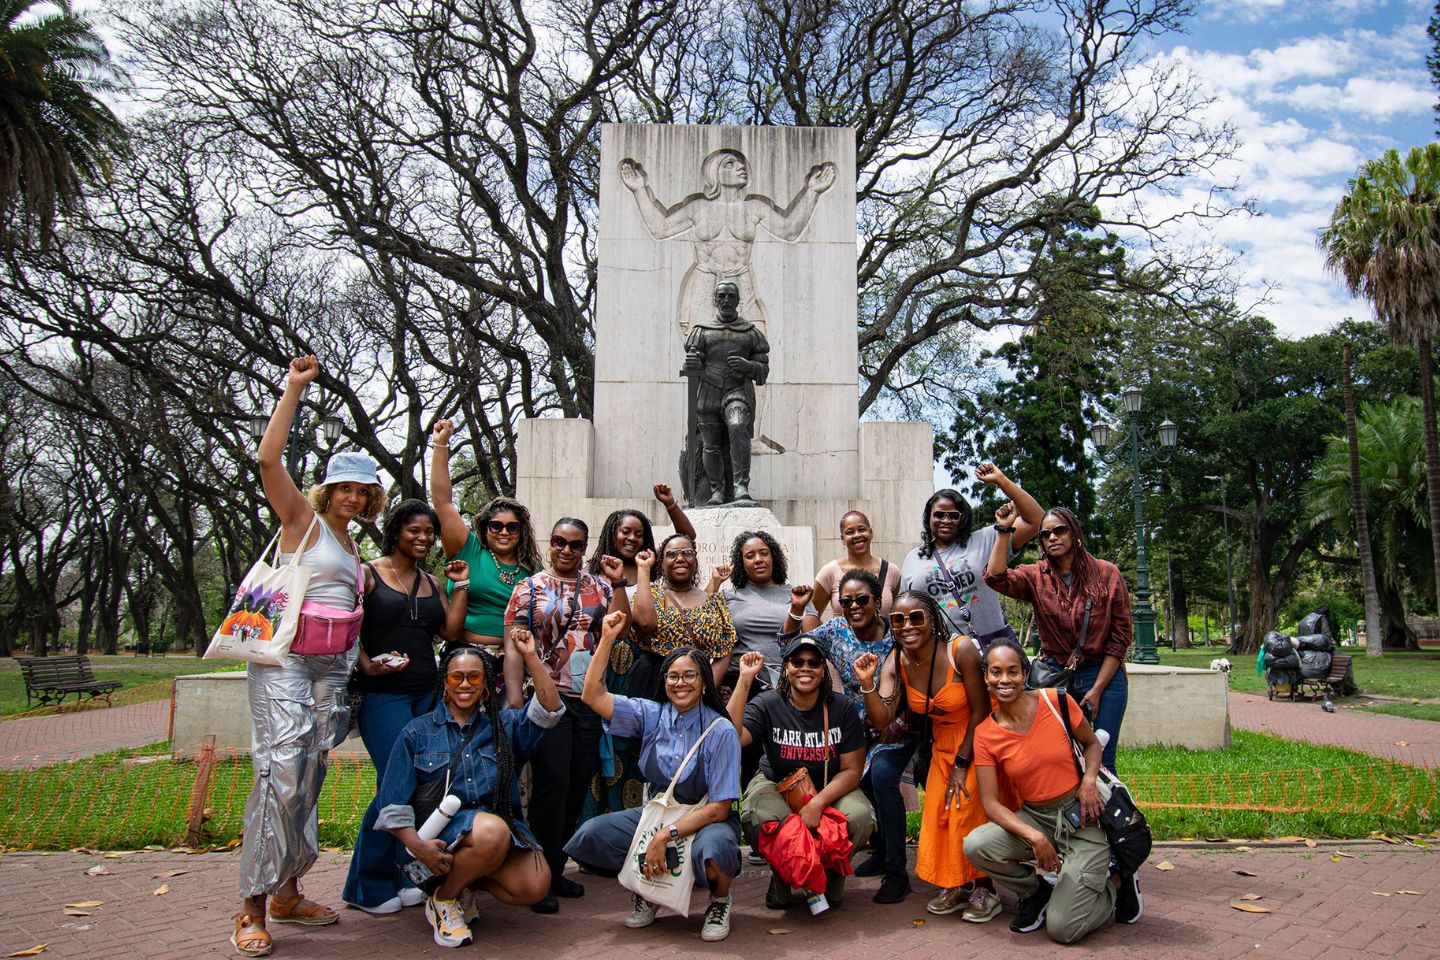 This Tour Company Is Amplifying Argentina’s Nearly Forgotten Afro-Argentine History